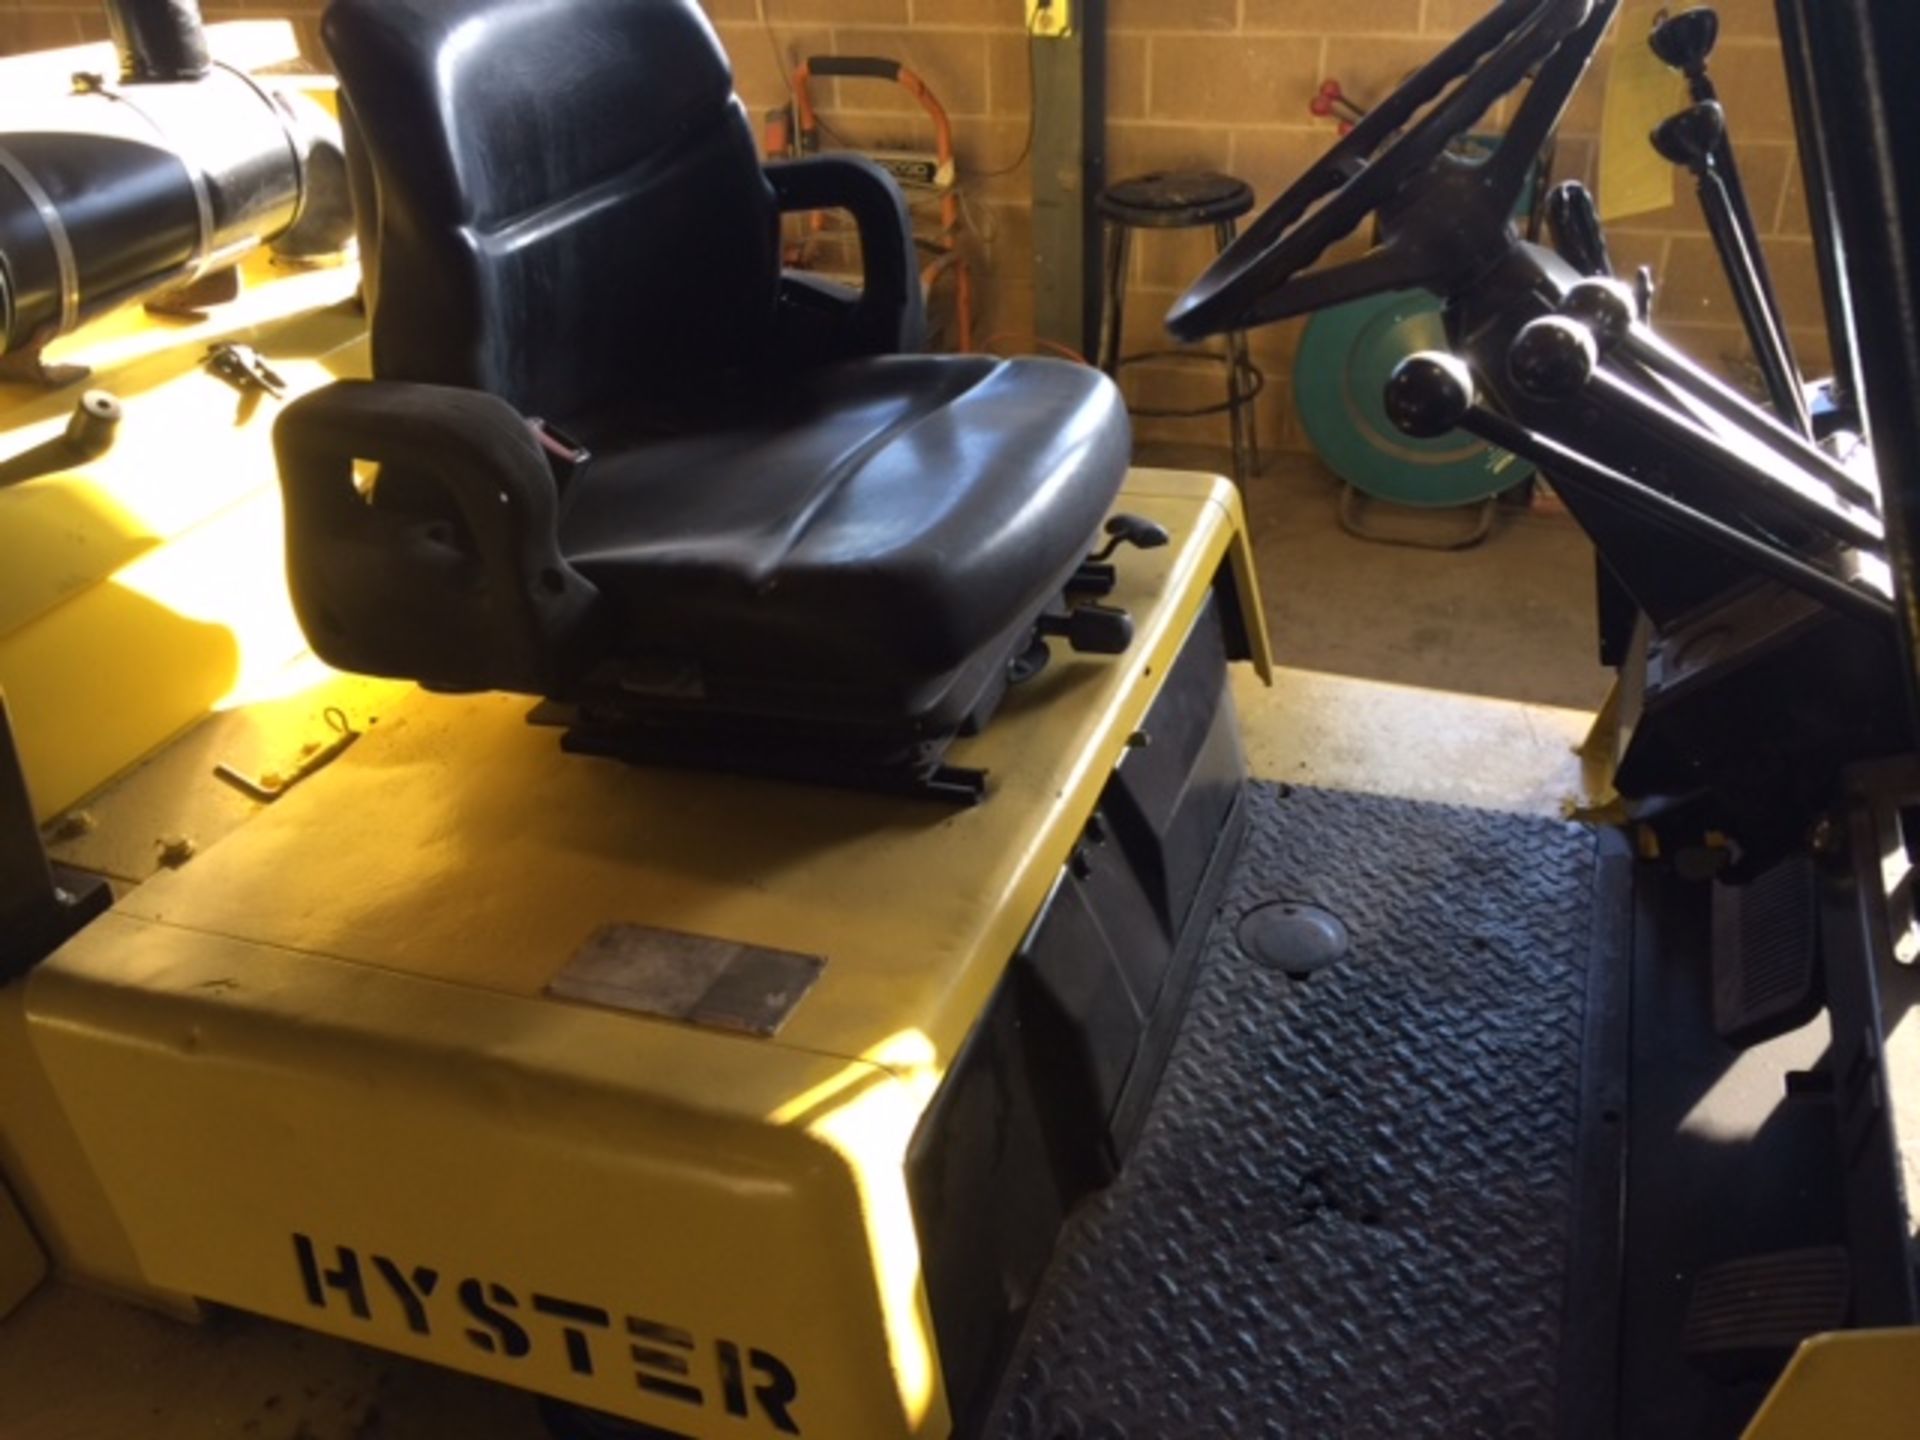 2006 HYSTER 15,500-lb. Capacity Forklift, Model S155XL2,Perkins Diesel Engine, 2-Speed Lever - Image 2 of 4